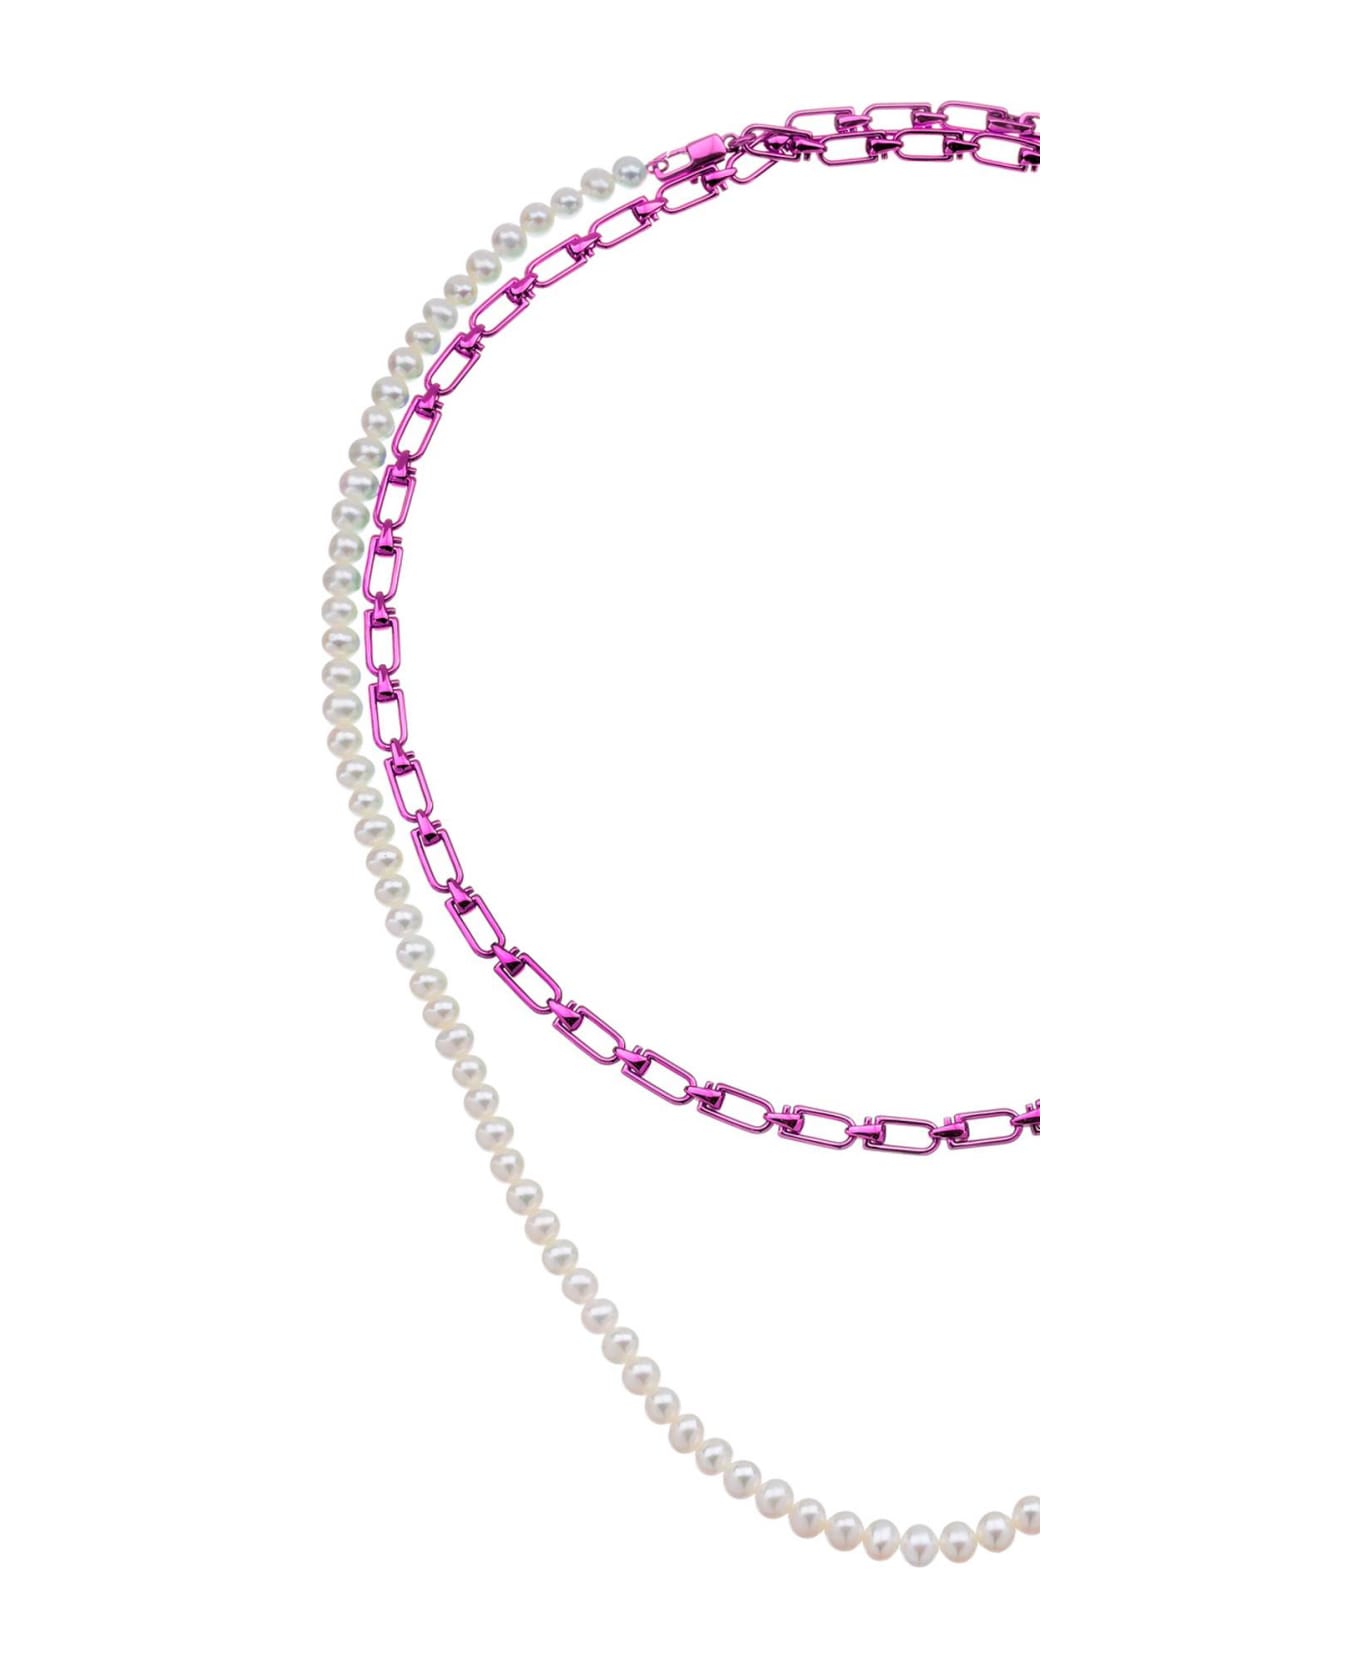 EÉRA 'reine' Double Necklace With Pearls - SILVER FUCHSIA (White)